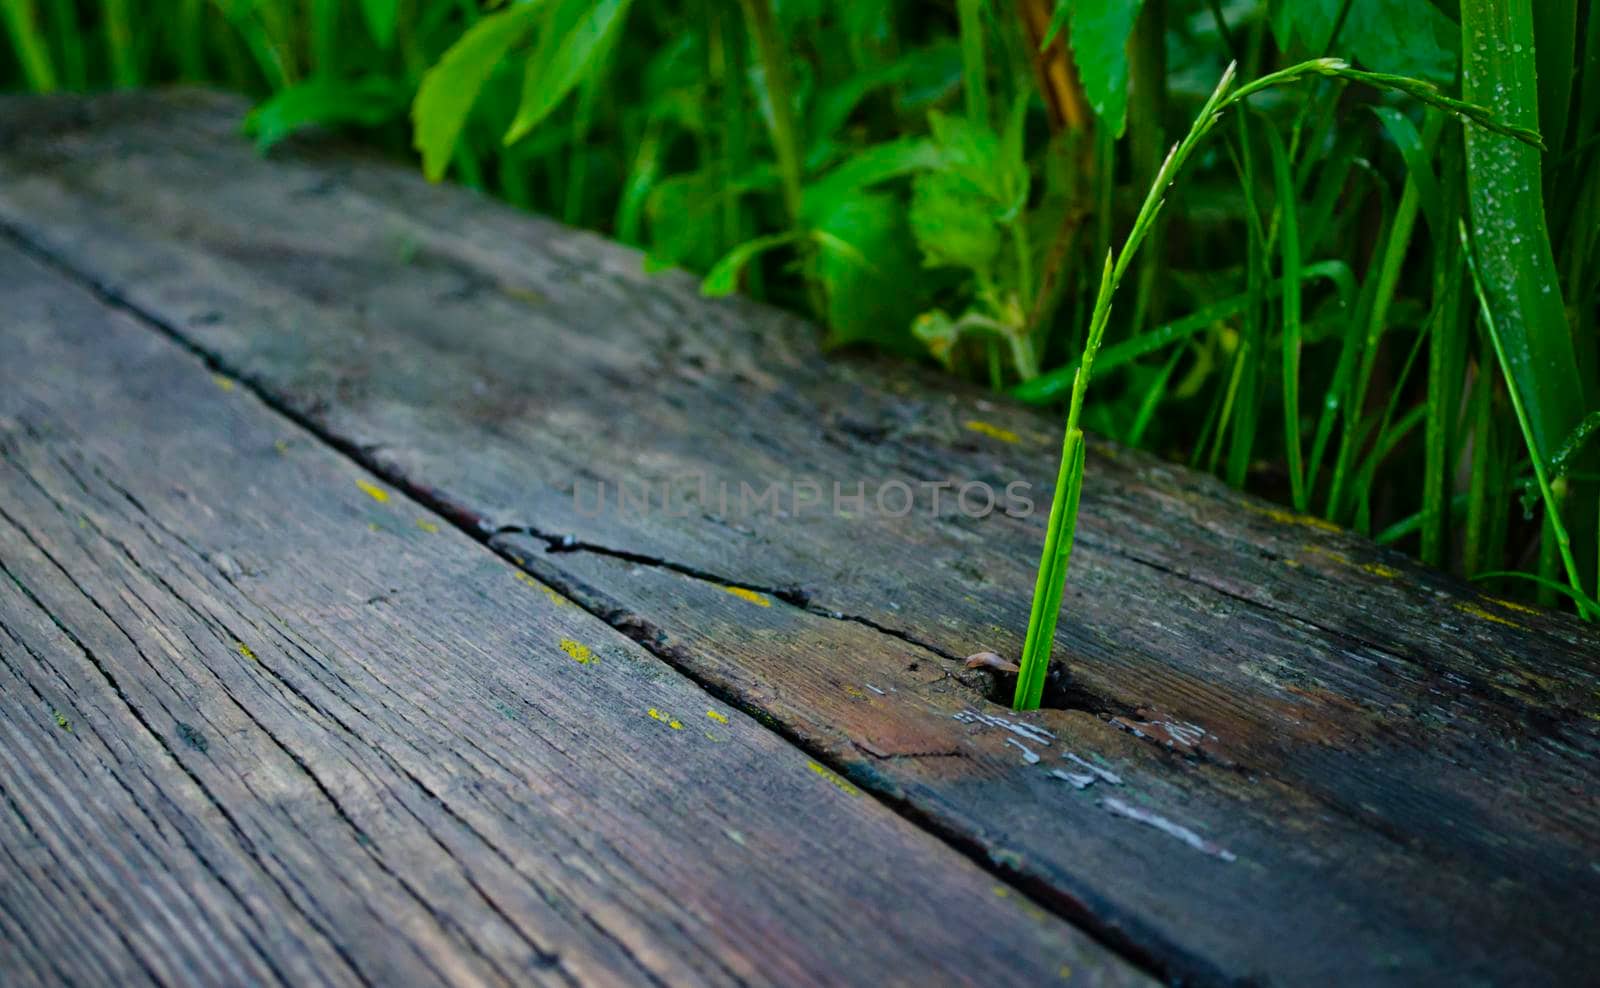 The grass is breaking through the wooden board. Dock of planks. Old gray wooden plank and green grass breaking through the planks. by mtx